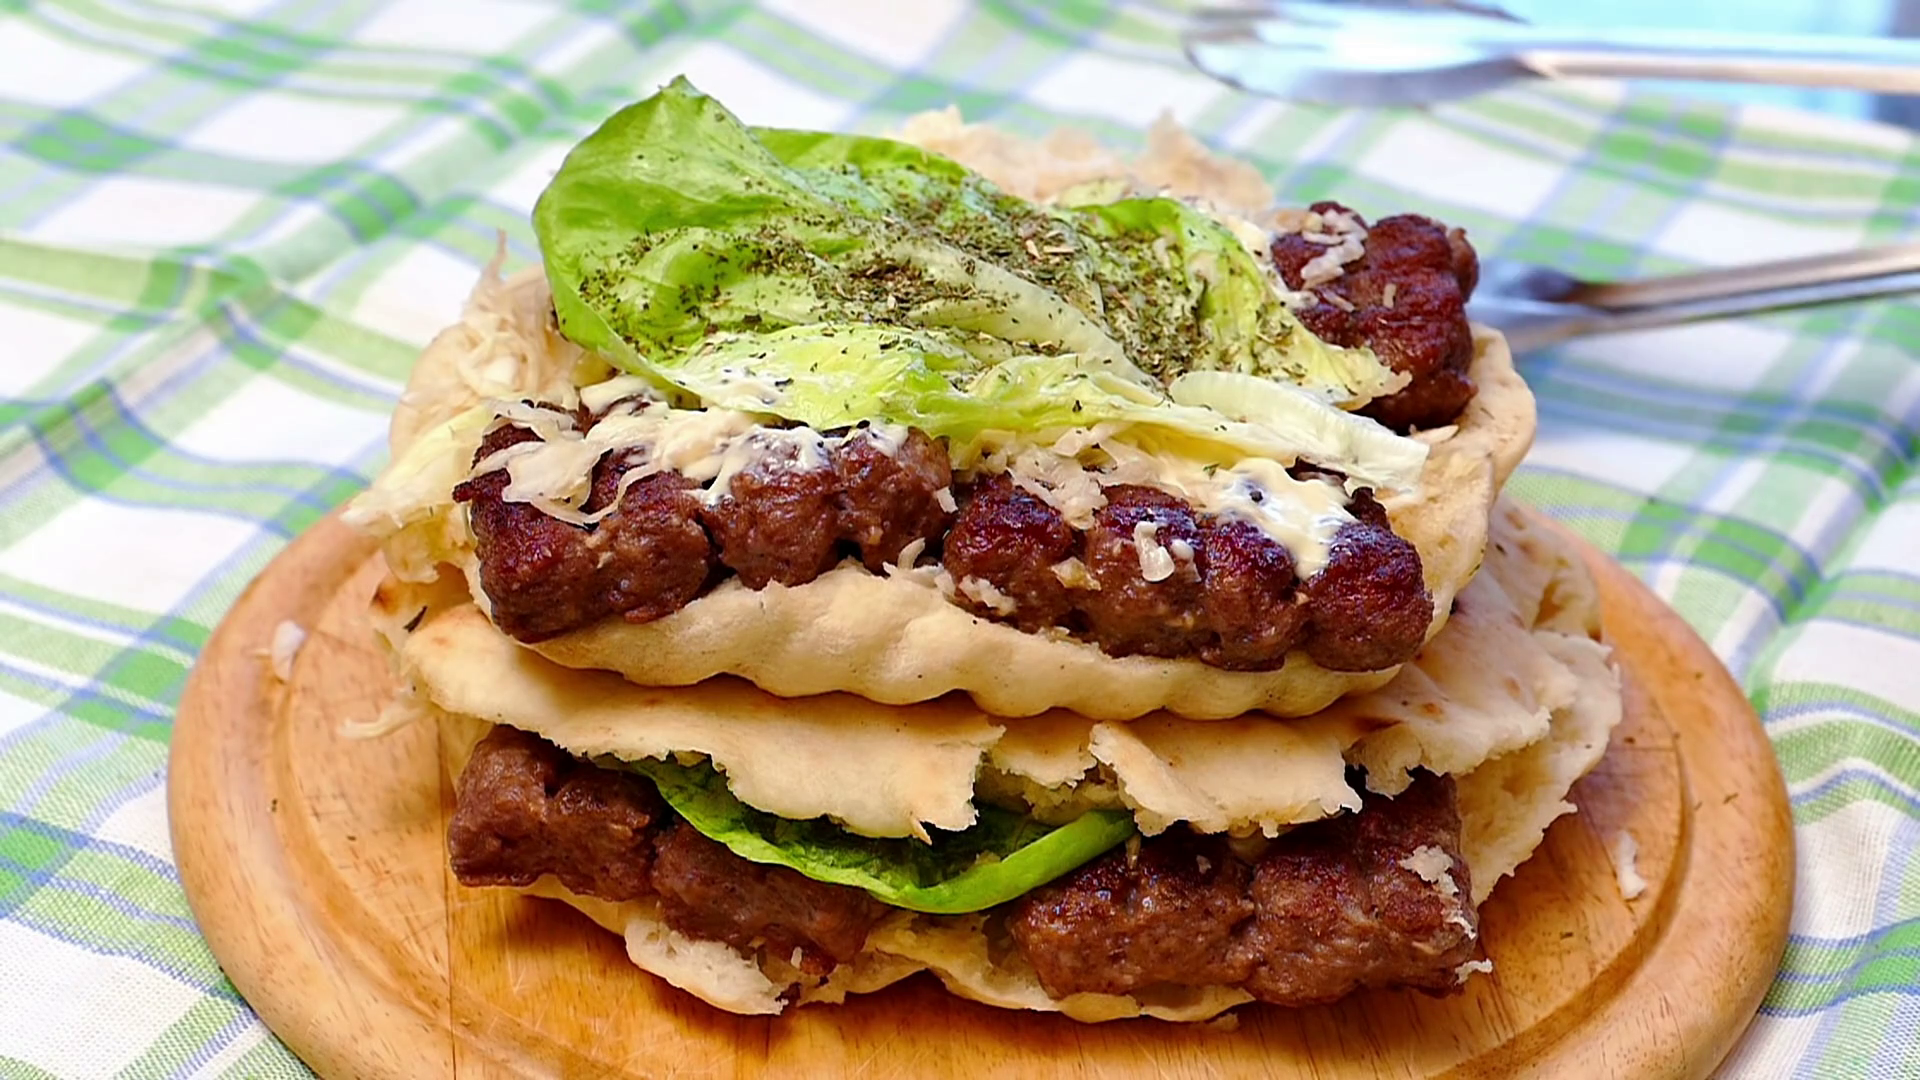 Juicy hamburger of pork and beef meat with mayonnaise and green ...